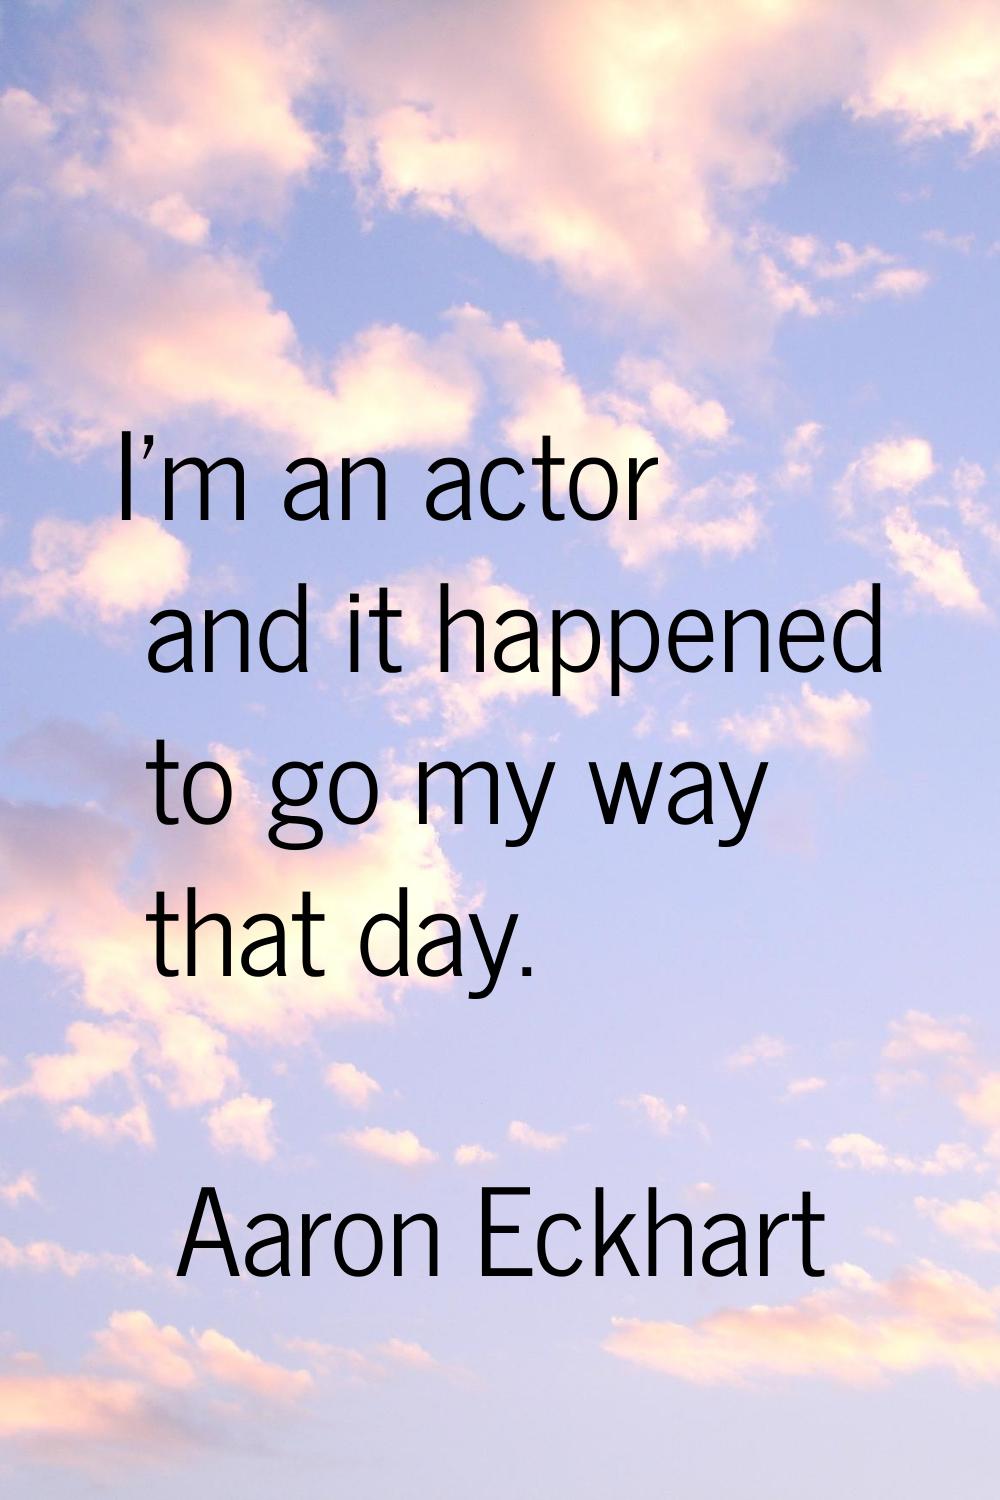 I'm an actor and it happened to go my way that day.